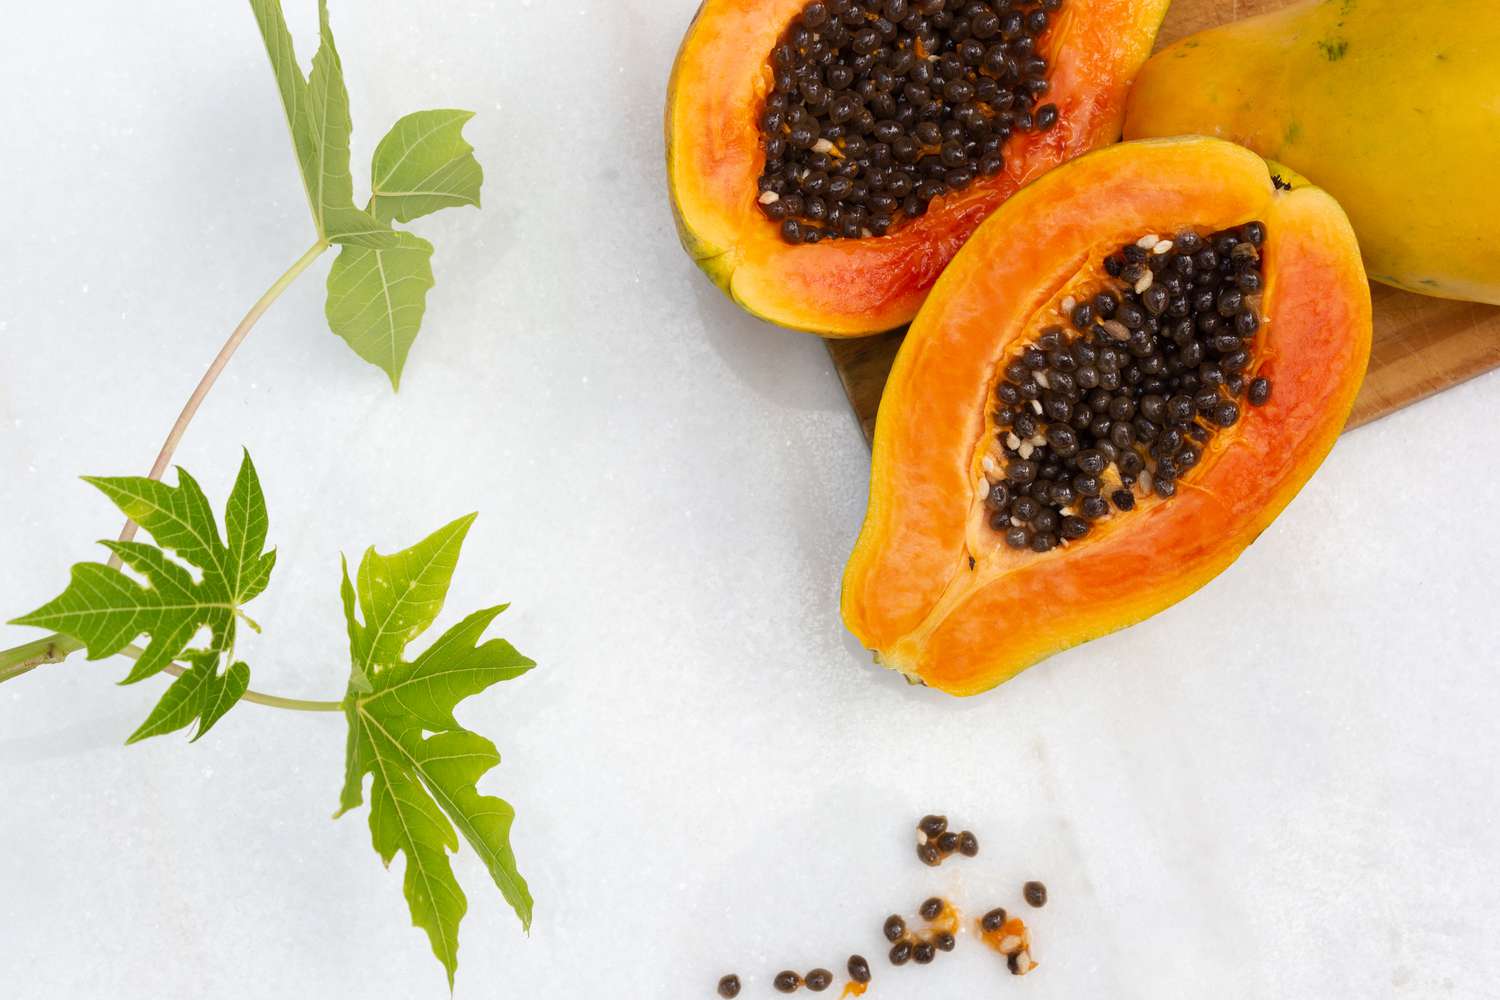 How to Care for Your Papaya Seedling: 5 Easy Tips